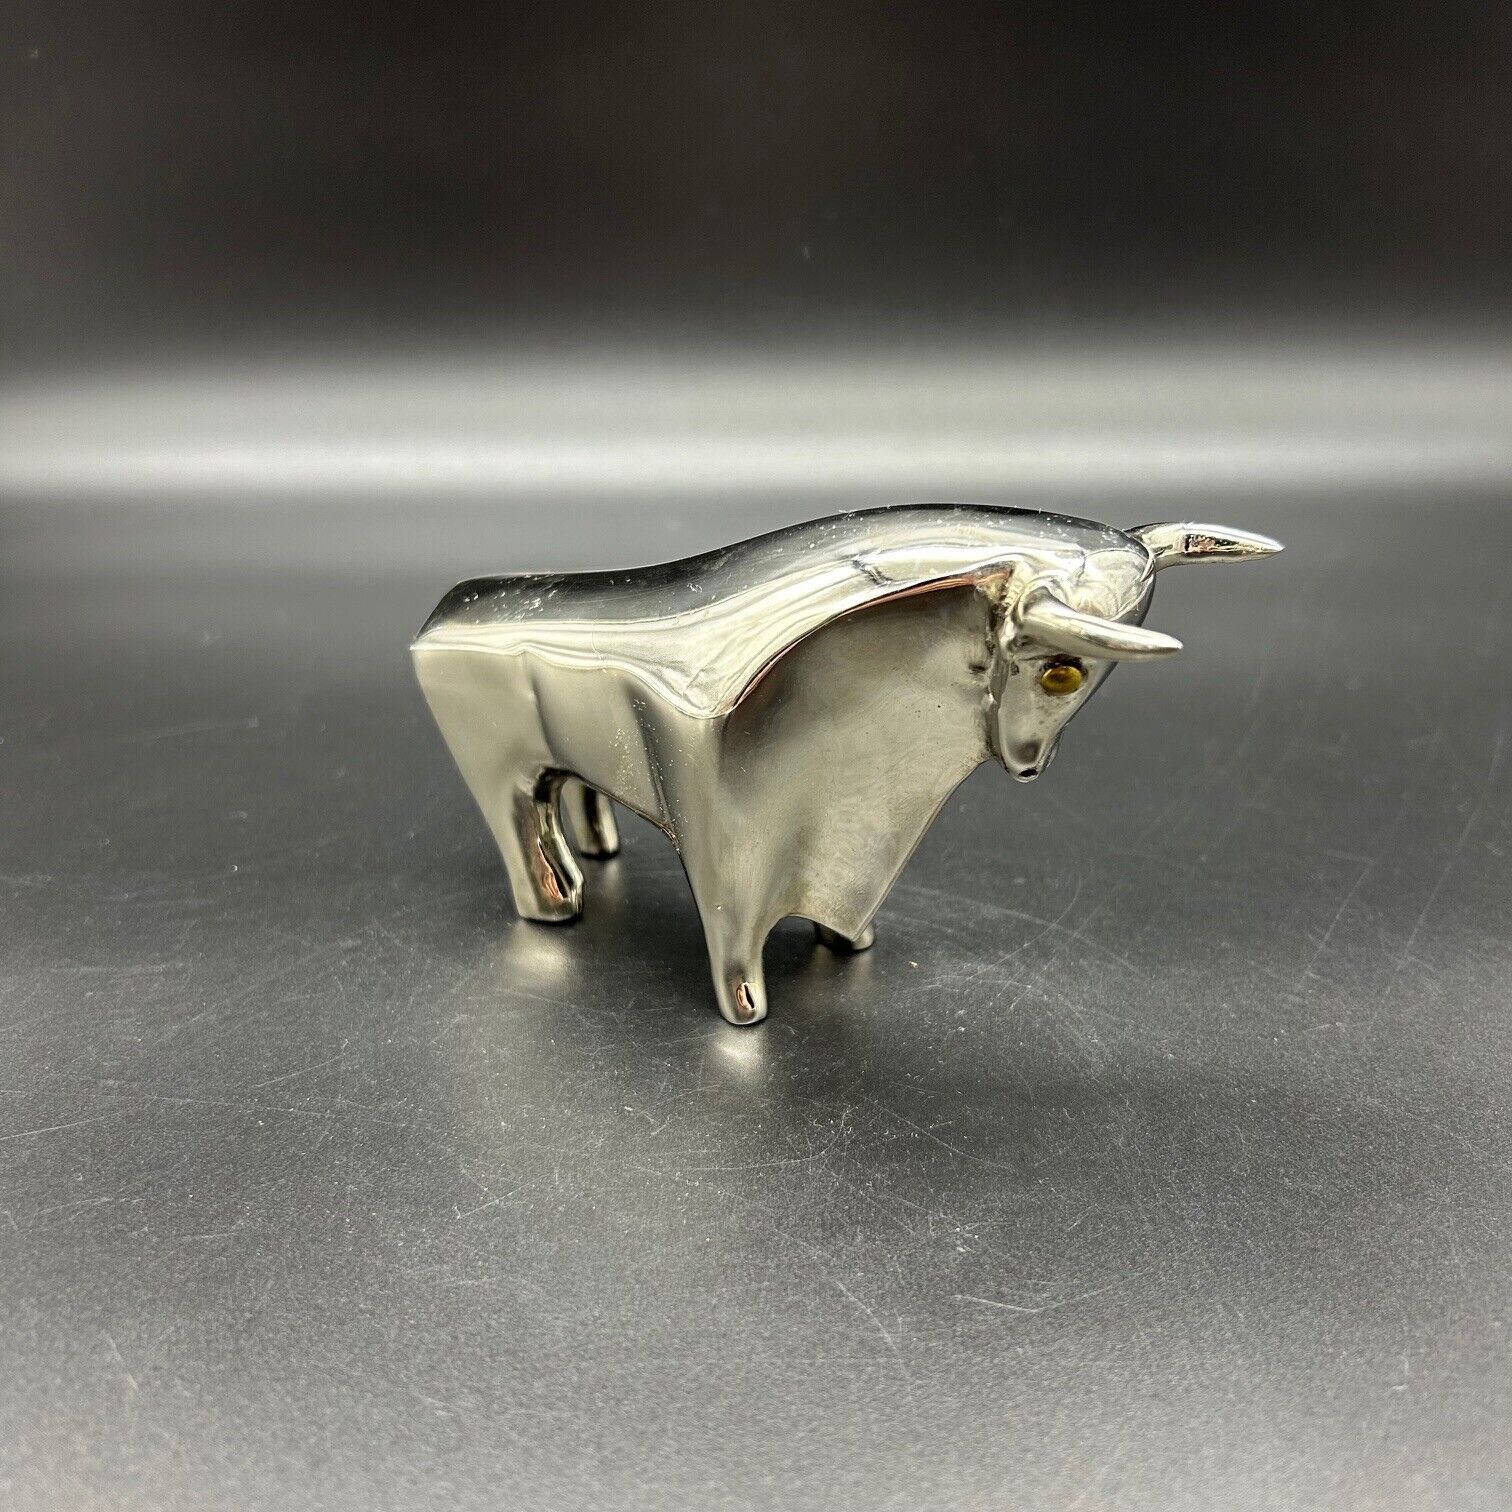 Chrome Silver Wall Street Stock Market Bull Paperweight Figurine 5 inches Long